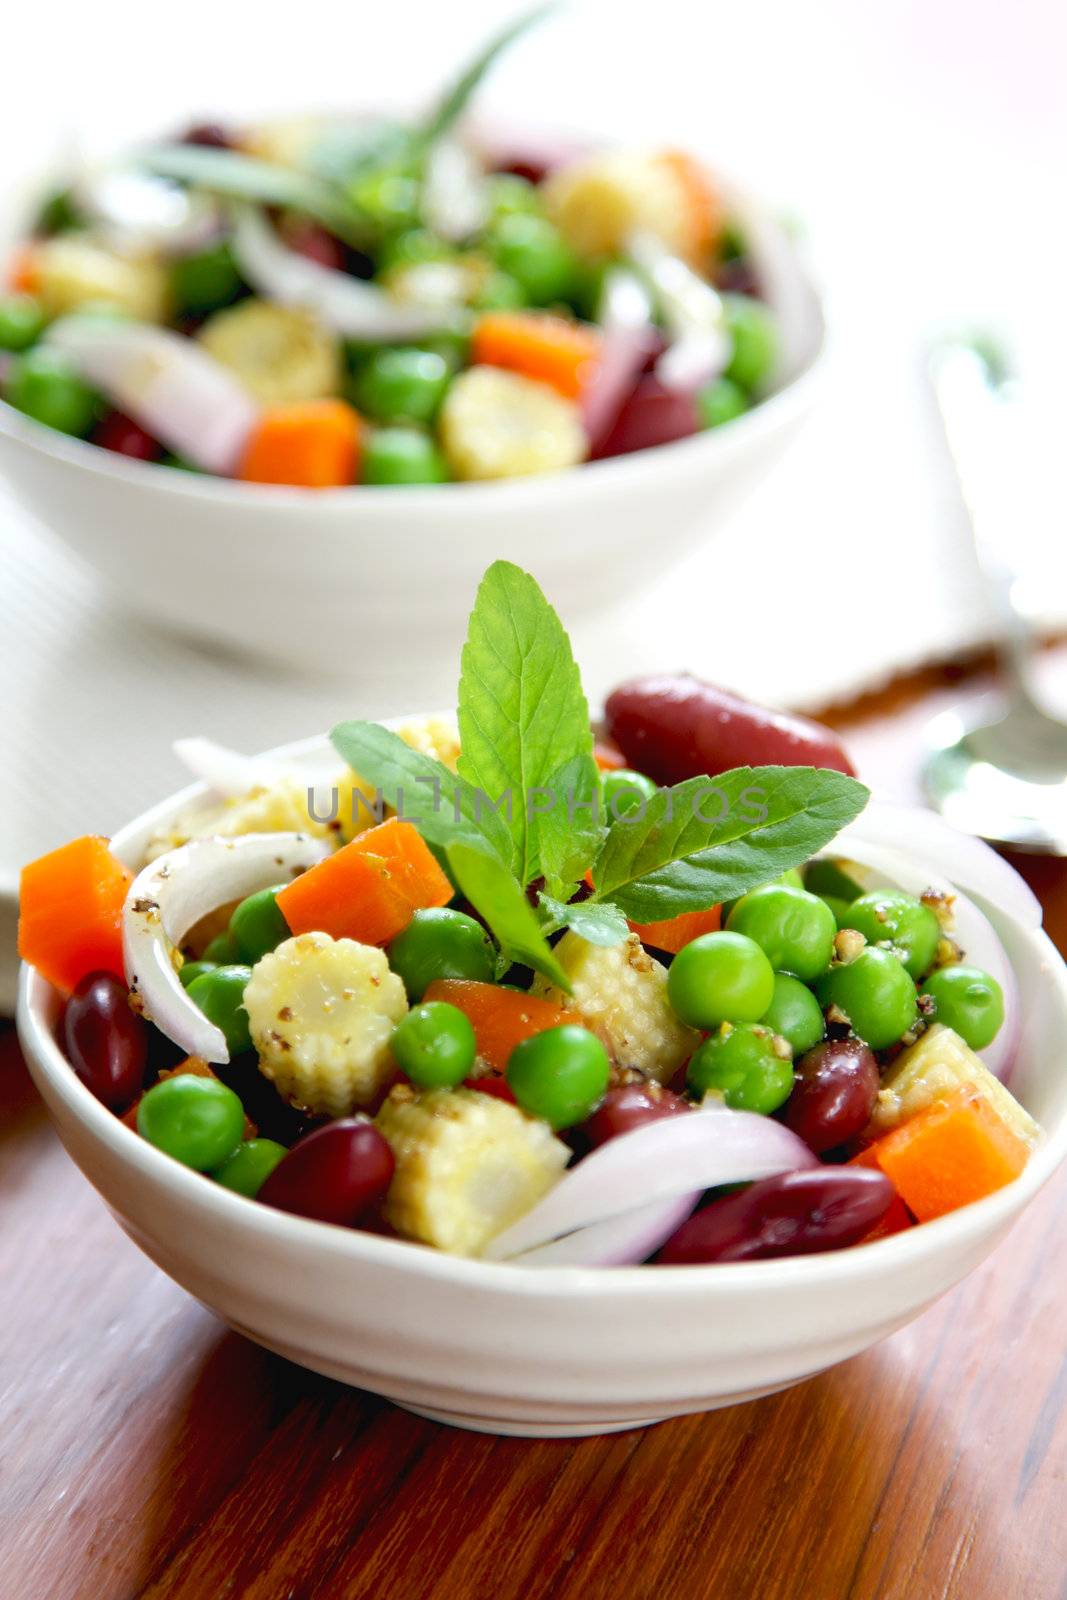 Beans & peas salad by vanillaechoes